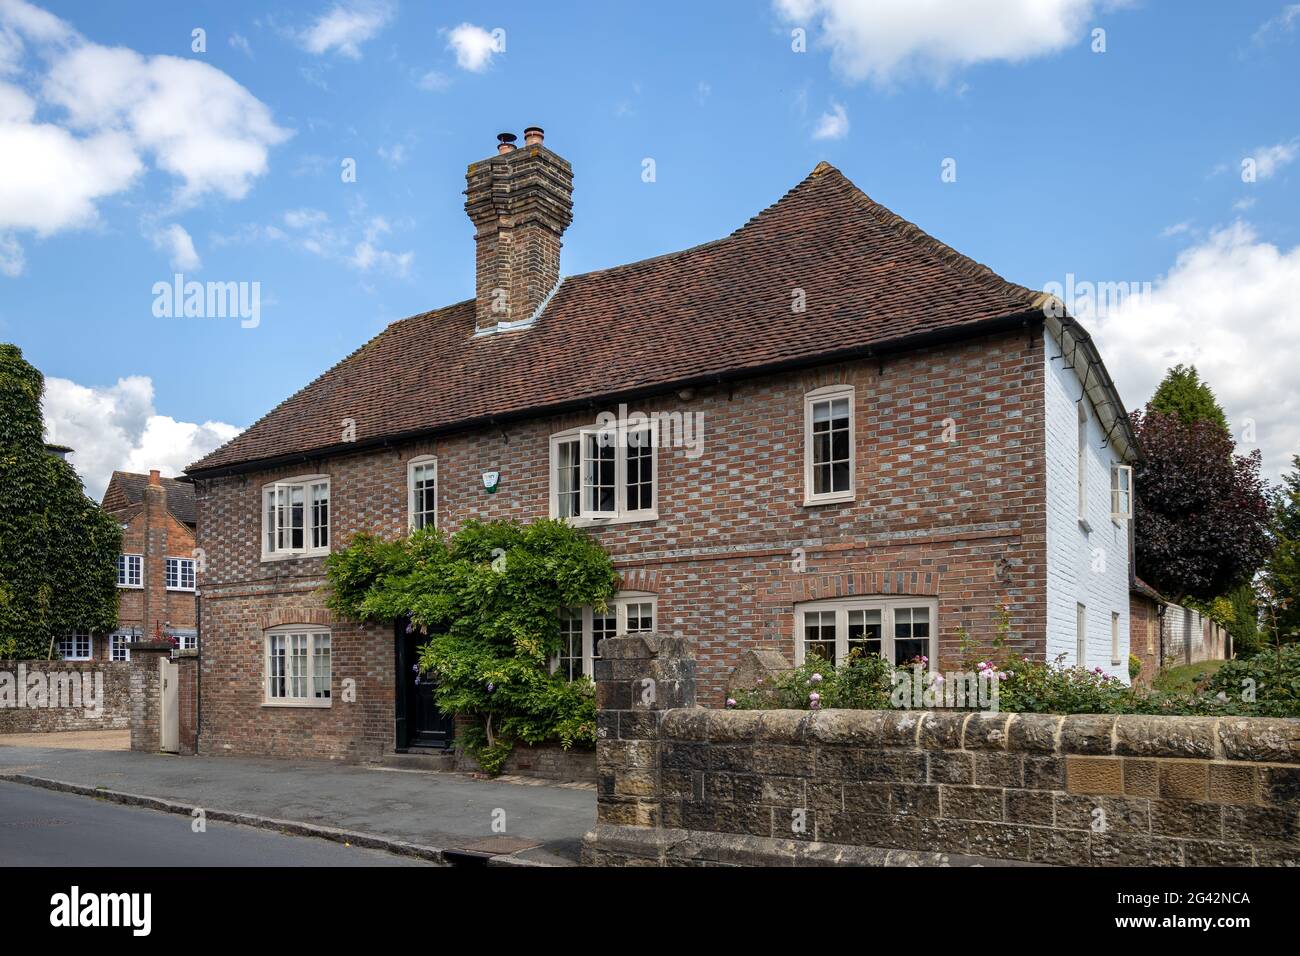 FLETCHING, EAST SUSSEX/UK - JULY 17 : View of Churchgate House a Grade II listed building in Fletching East Sussex on July 17, 2 Stock Photo